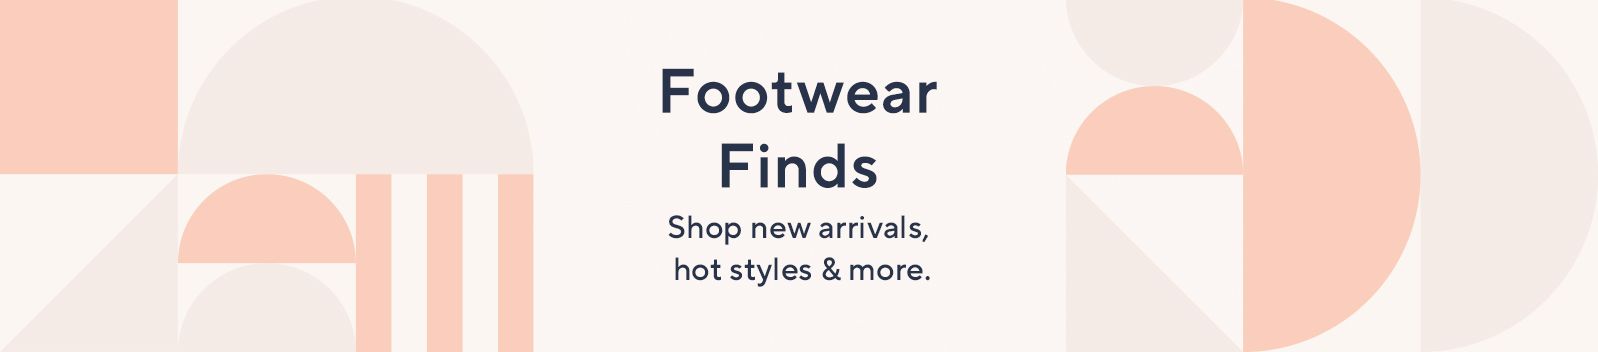 Footwear Finds: Shop new arrivals, hot styles & more.